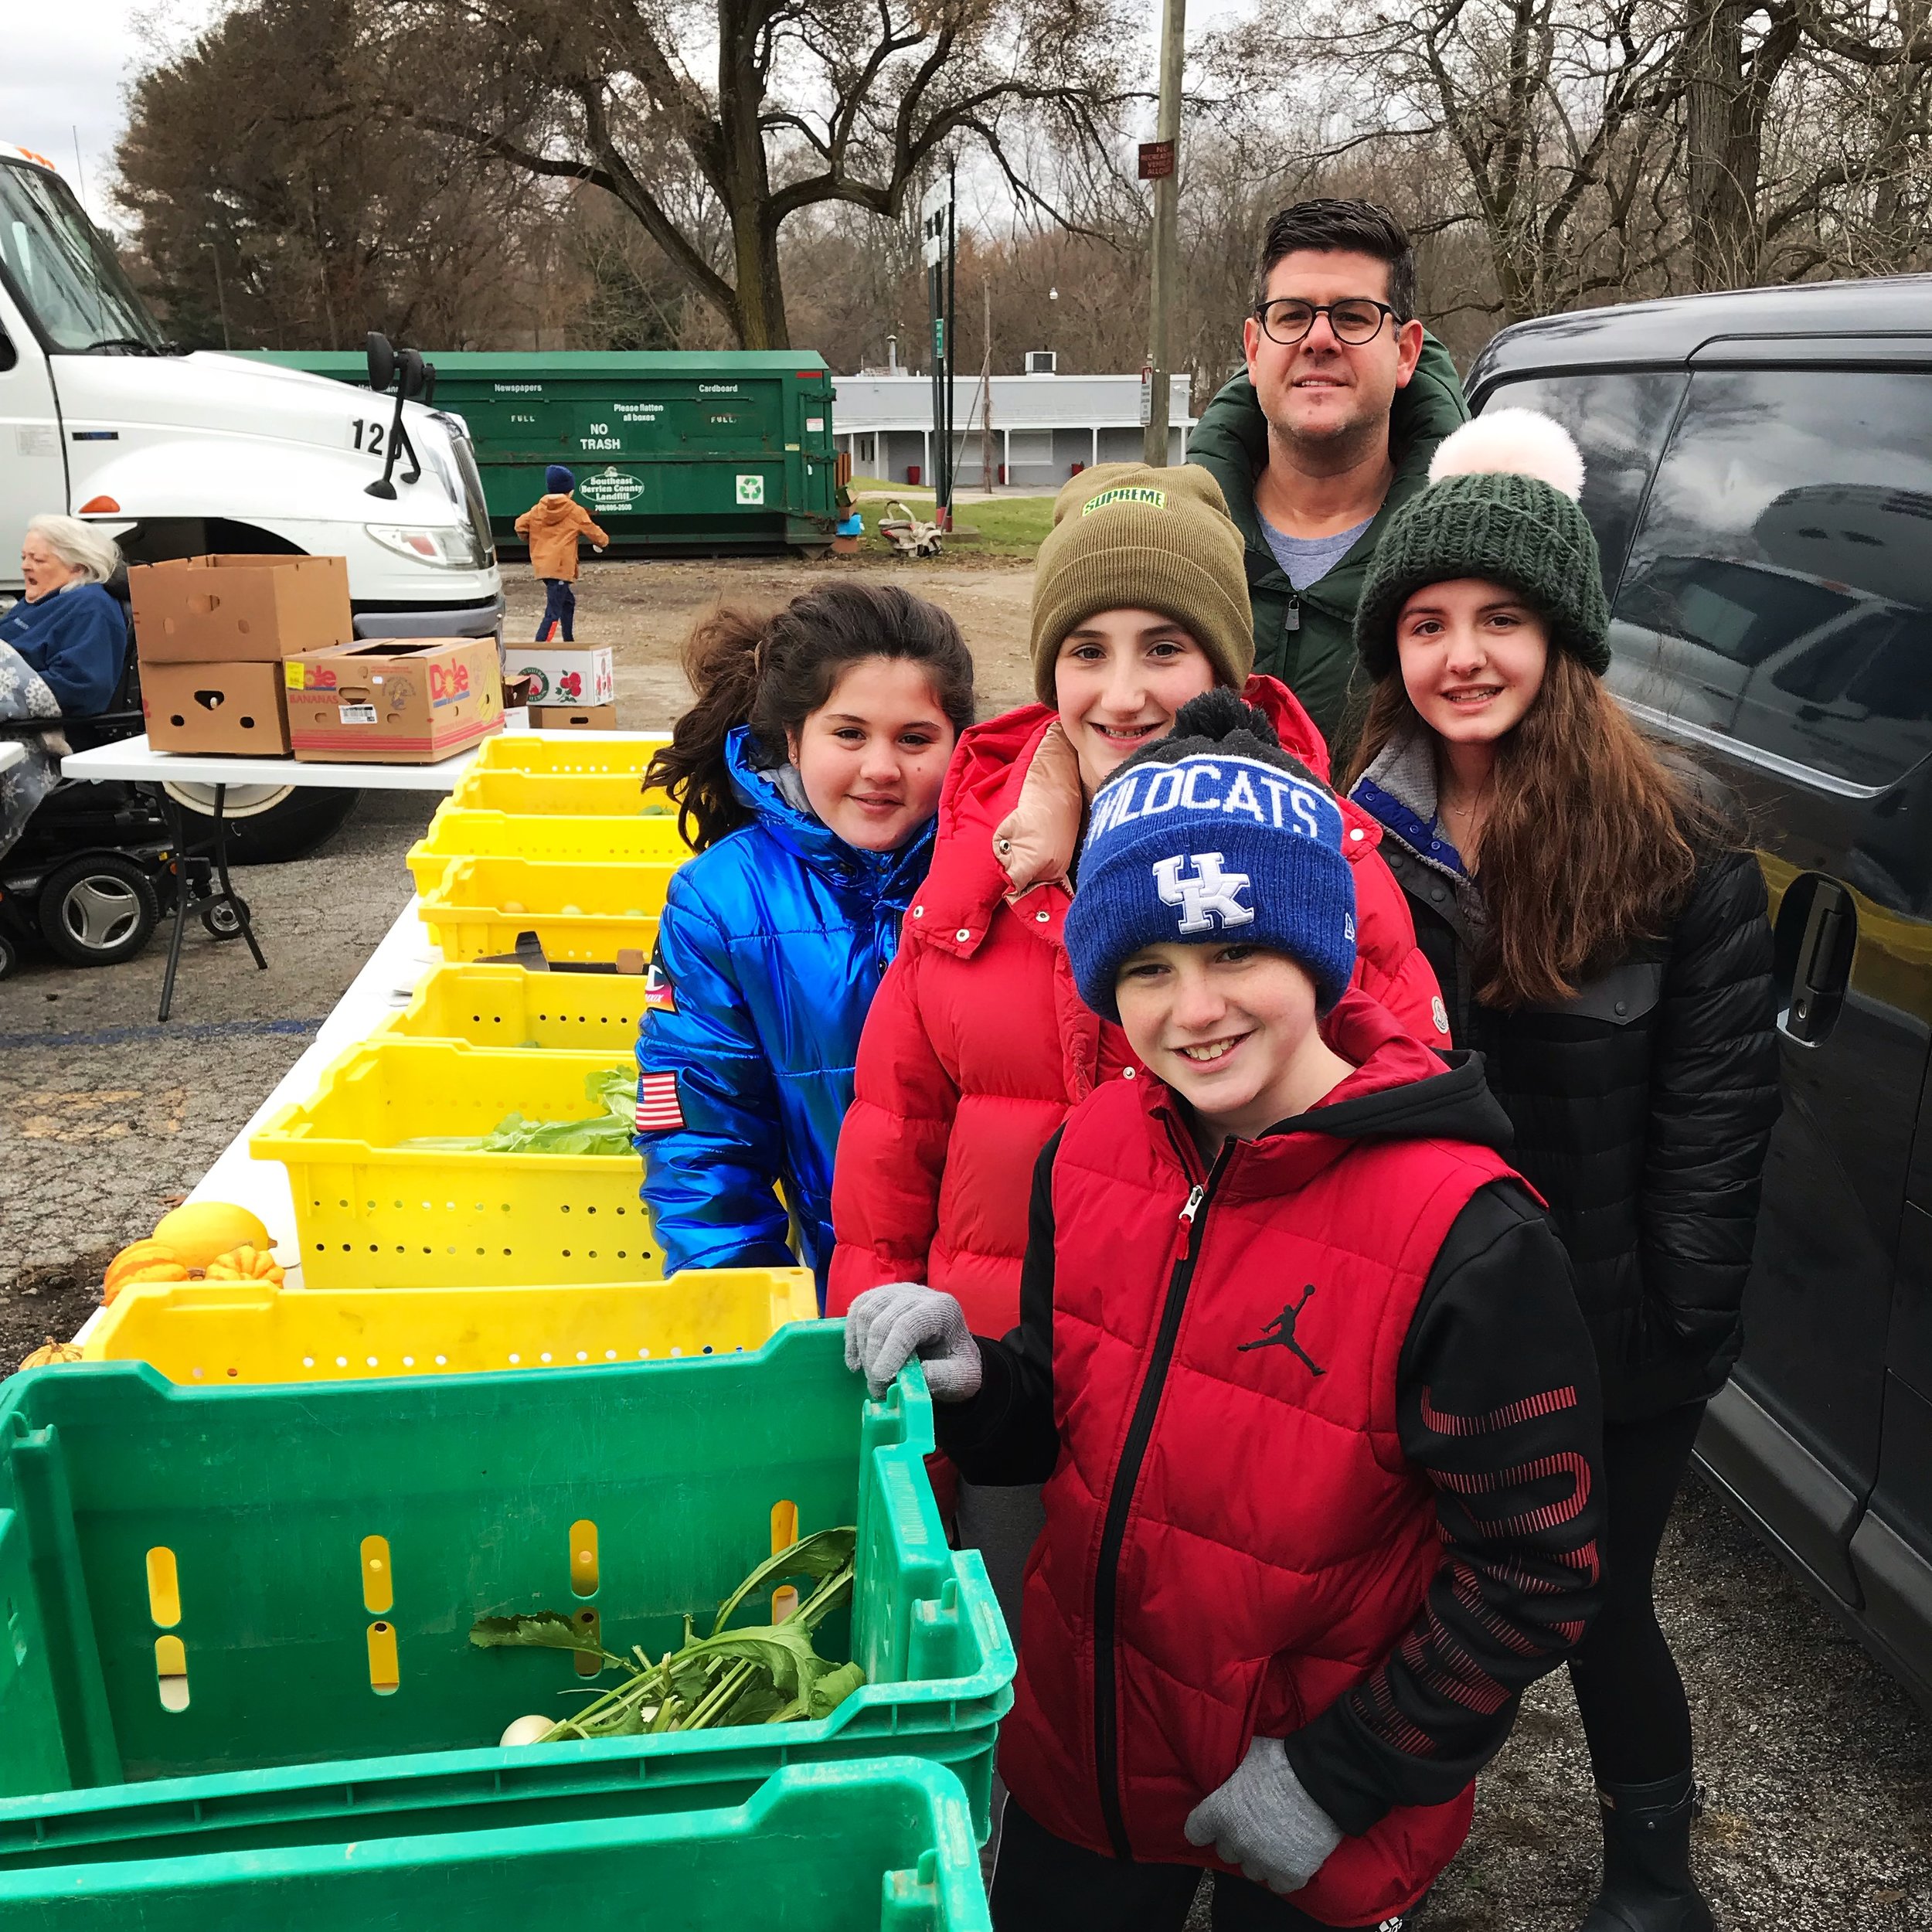  The Harris family at our Thanksgiving Mobile Food Pantry in New Troy, MI 